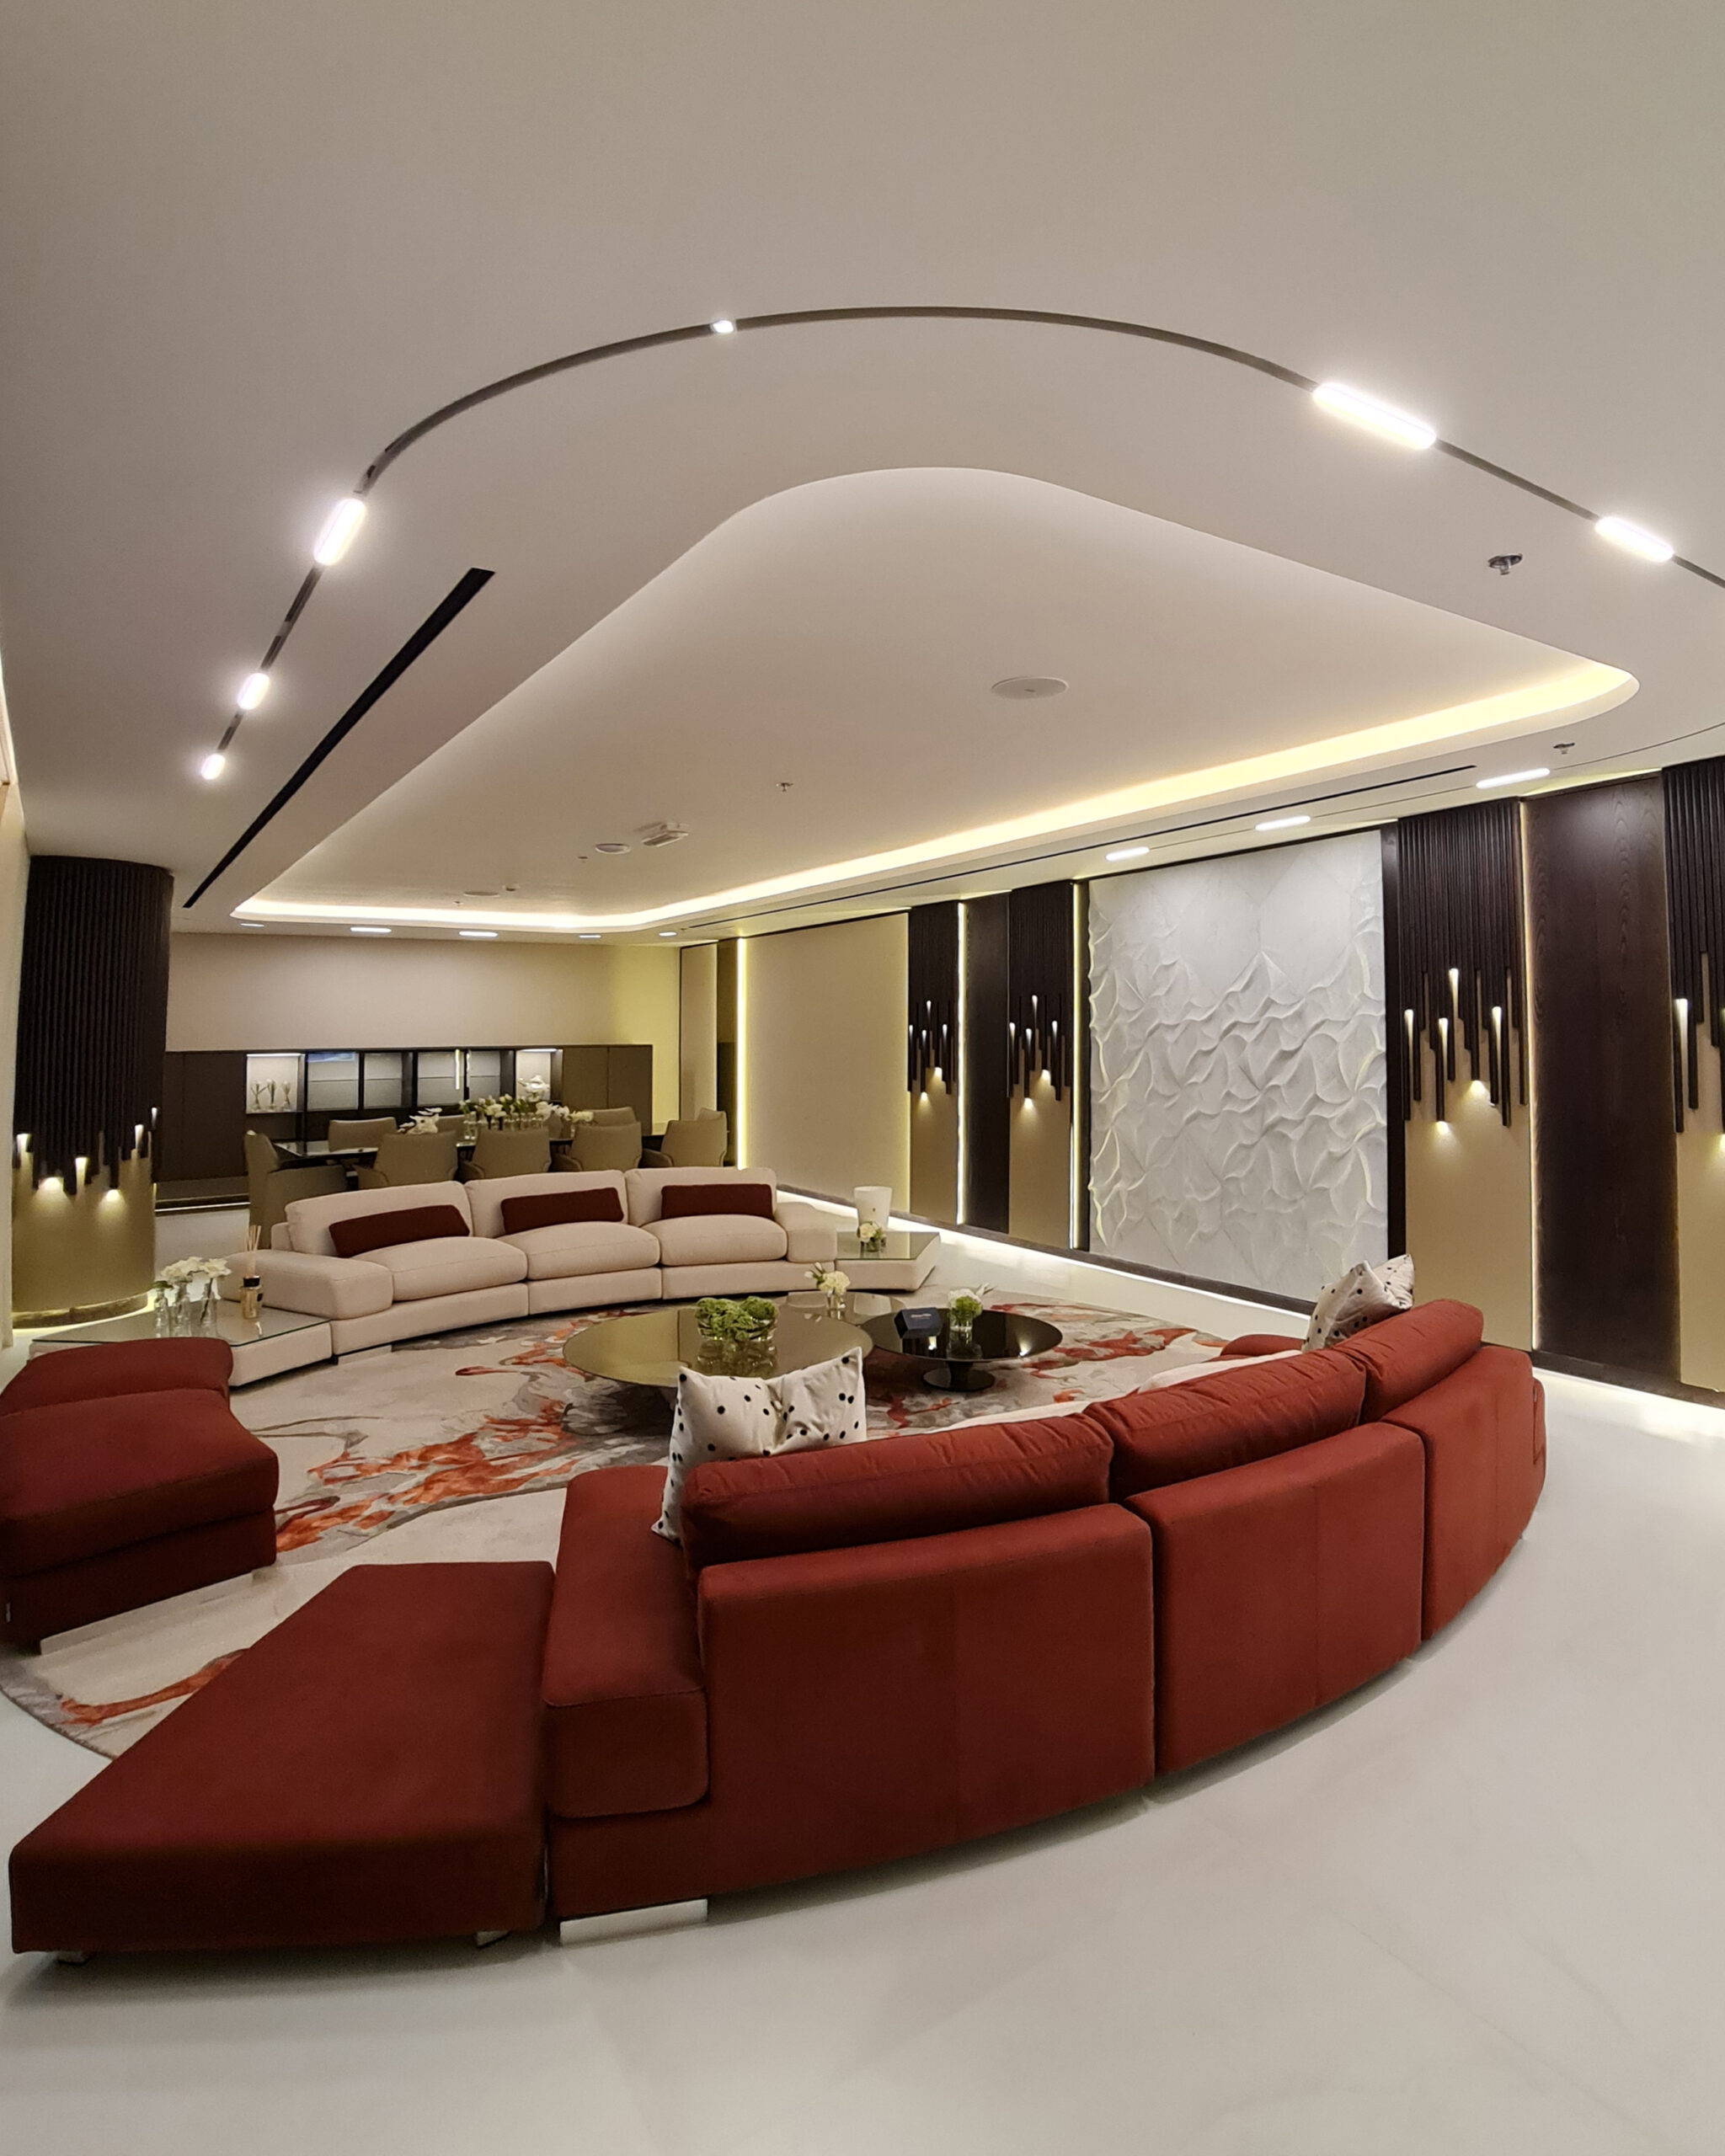 Turnkey Solutions To Streamline Your Interior Projects